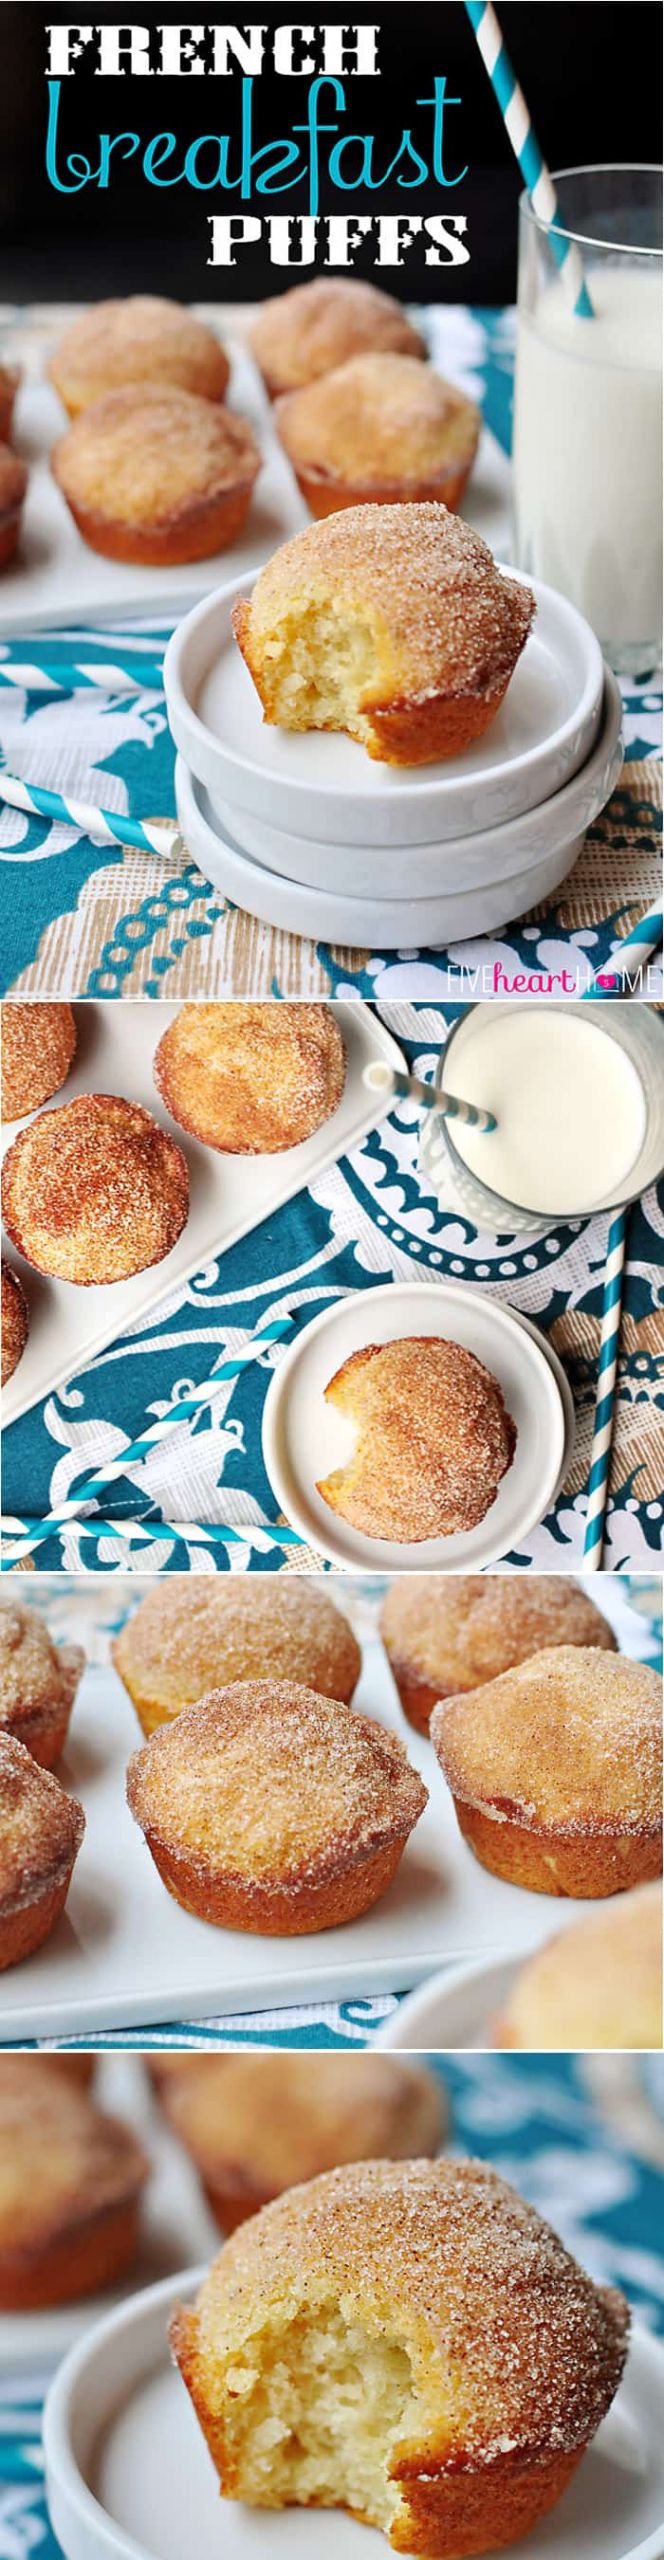 French Brunch Recipes
 French Breakfast Puffs • FIVEheartHOME